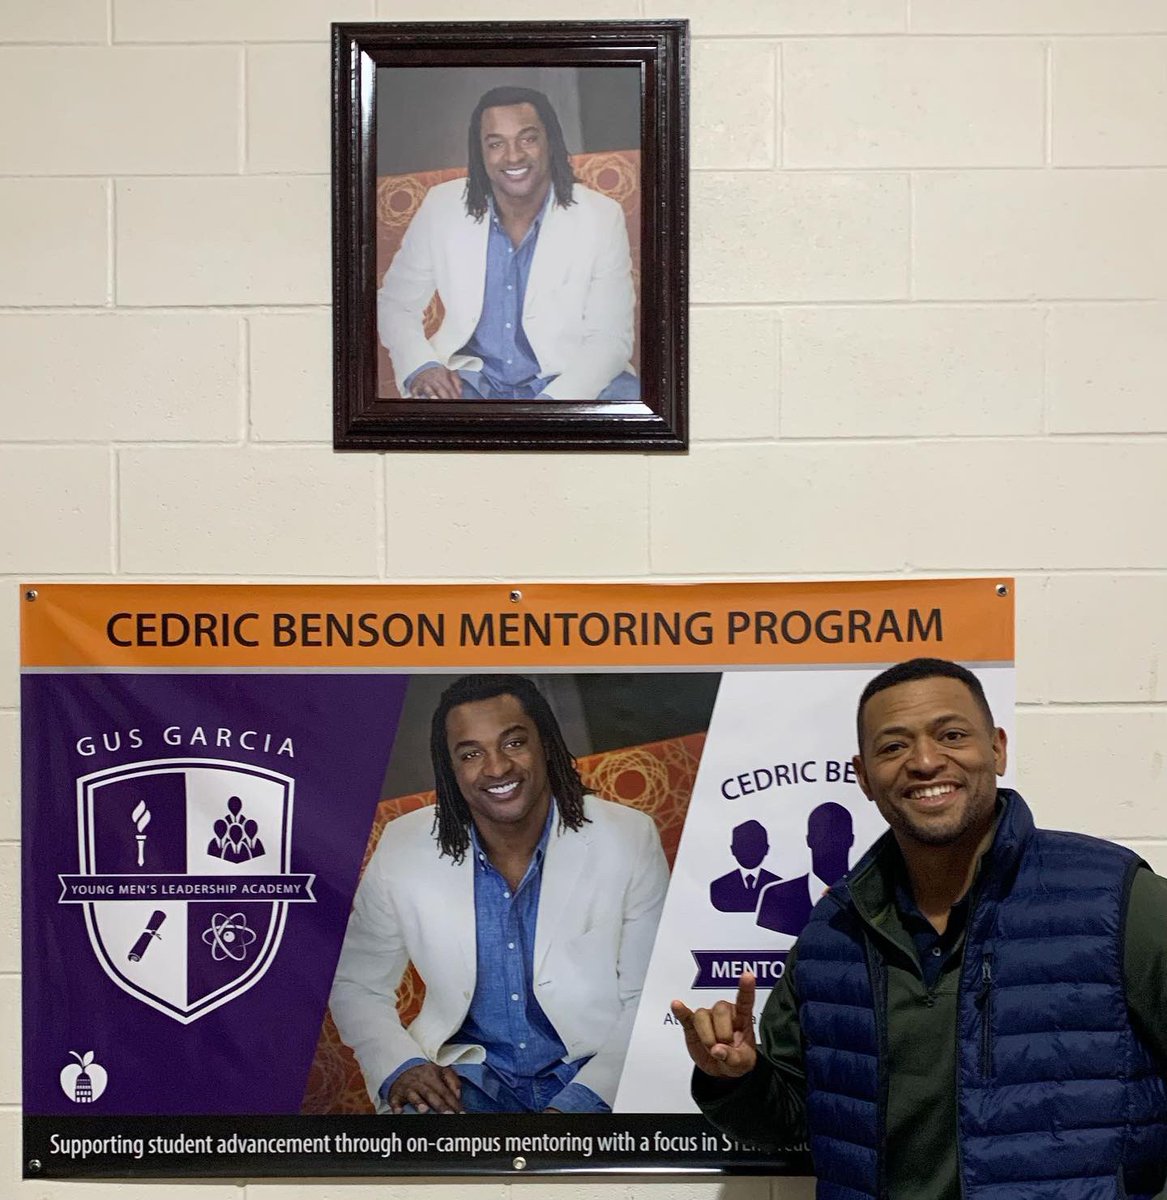 A special thank you to the Gus Garcia YMLA students and staff for partnering with the Cedric Benson Mentoring Program and having me speak to the school. It was an honor to share my story of the ups and downs of being a pro-athlete and life after the NFL #givingback #philanthropy https://t.co/kxheSxw4TX